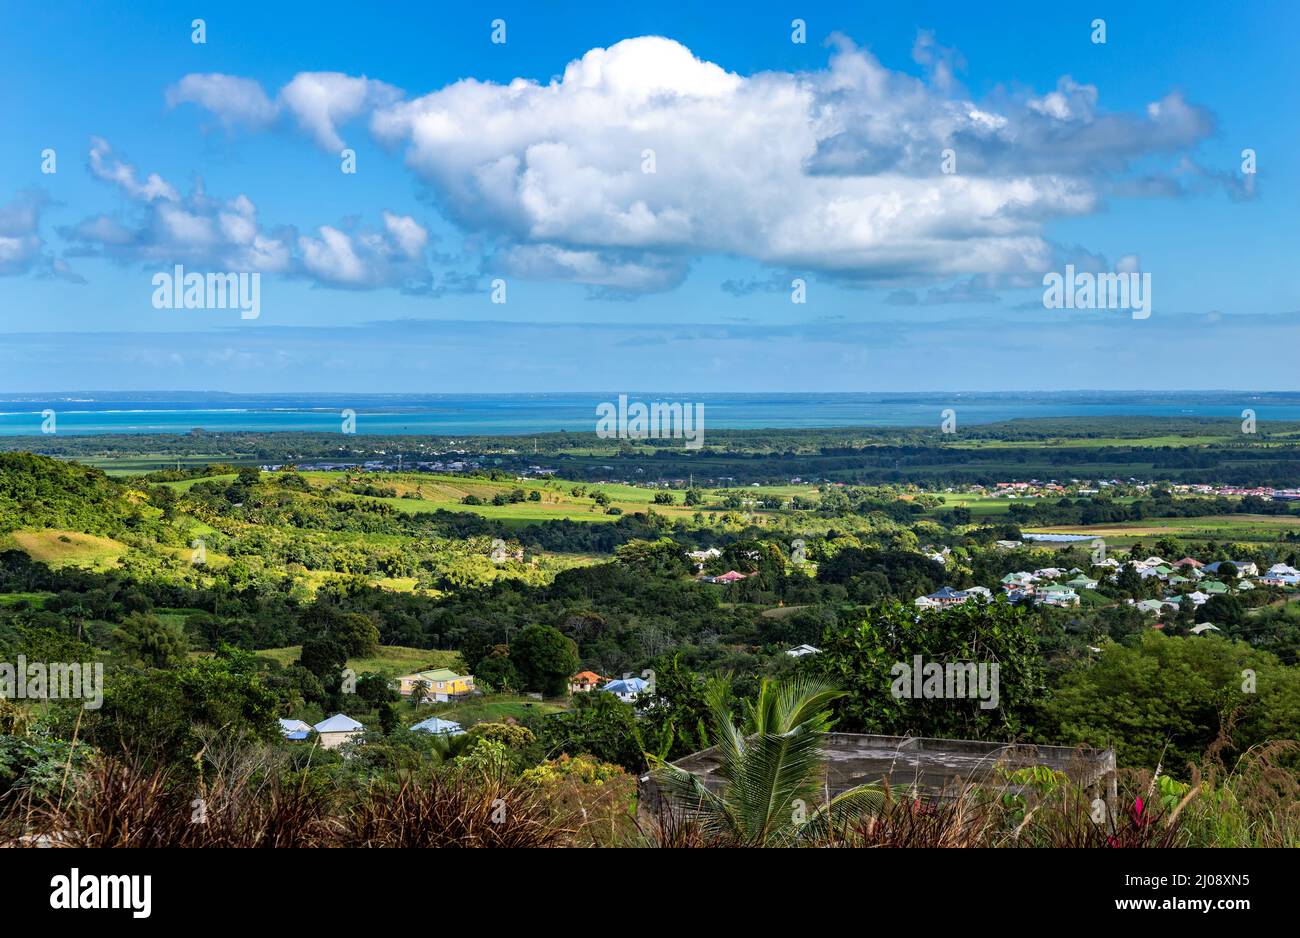 North coast of Basse-Terre, Guadeloupe, Lesser Antilles, Caribbean. Stock Photo